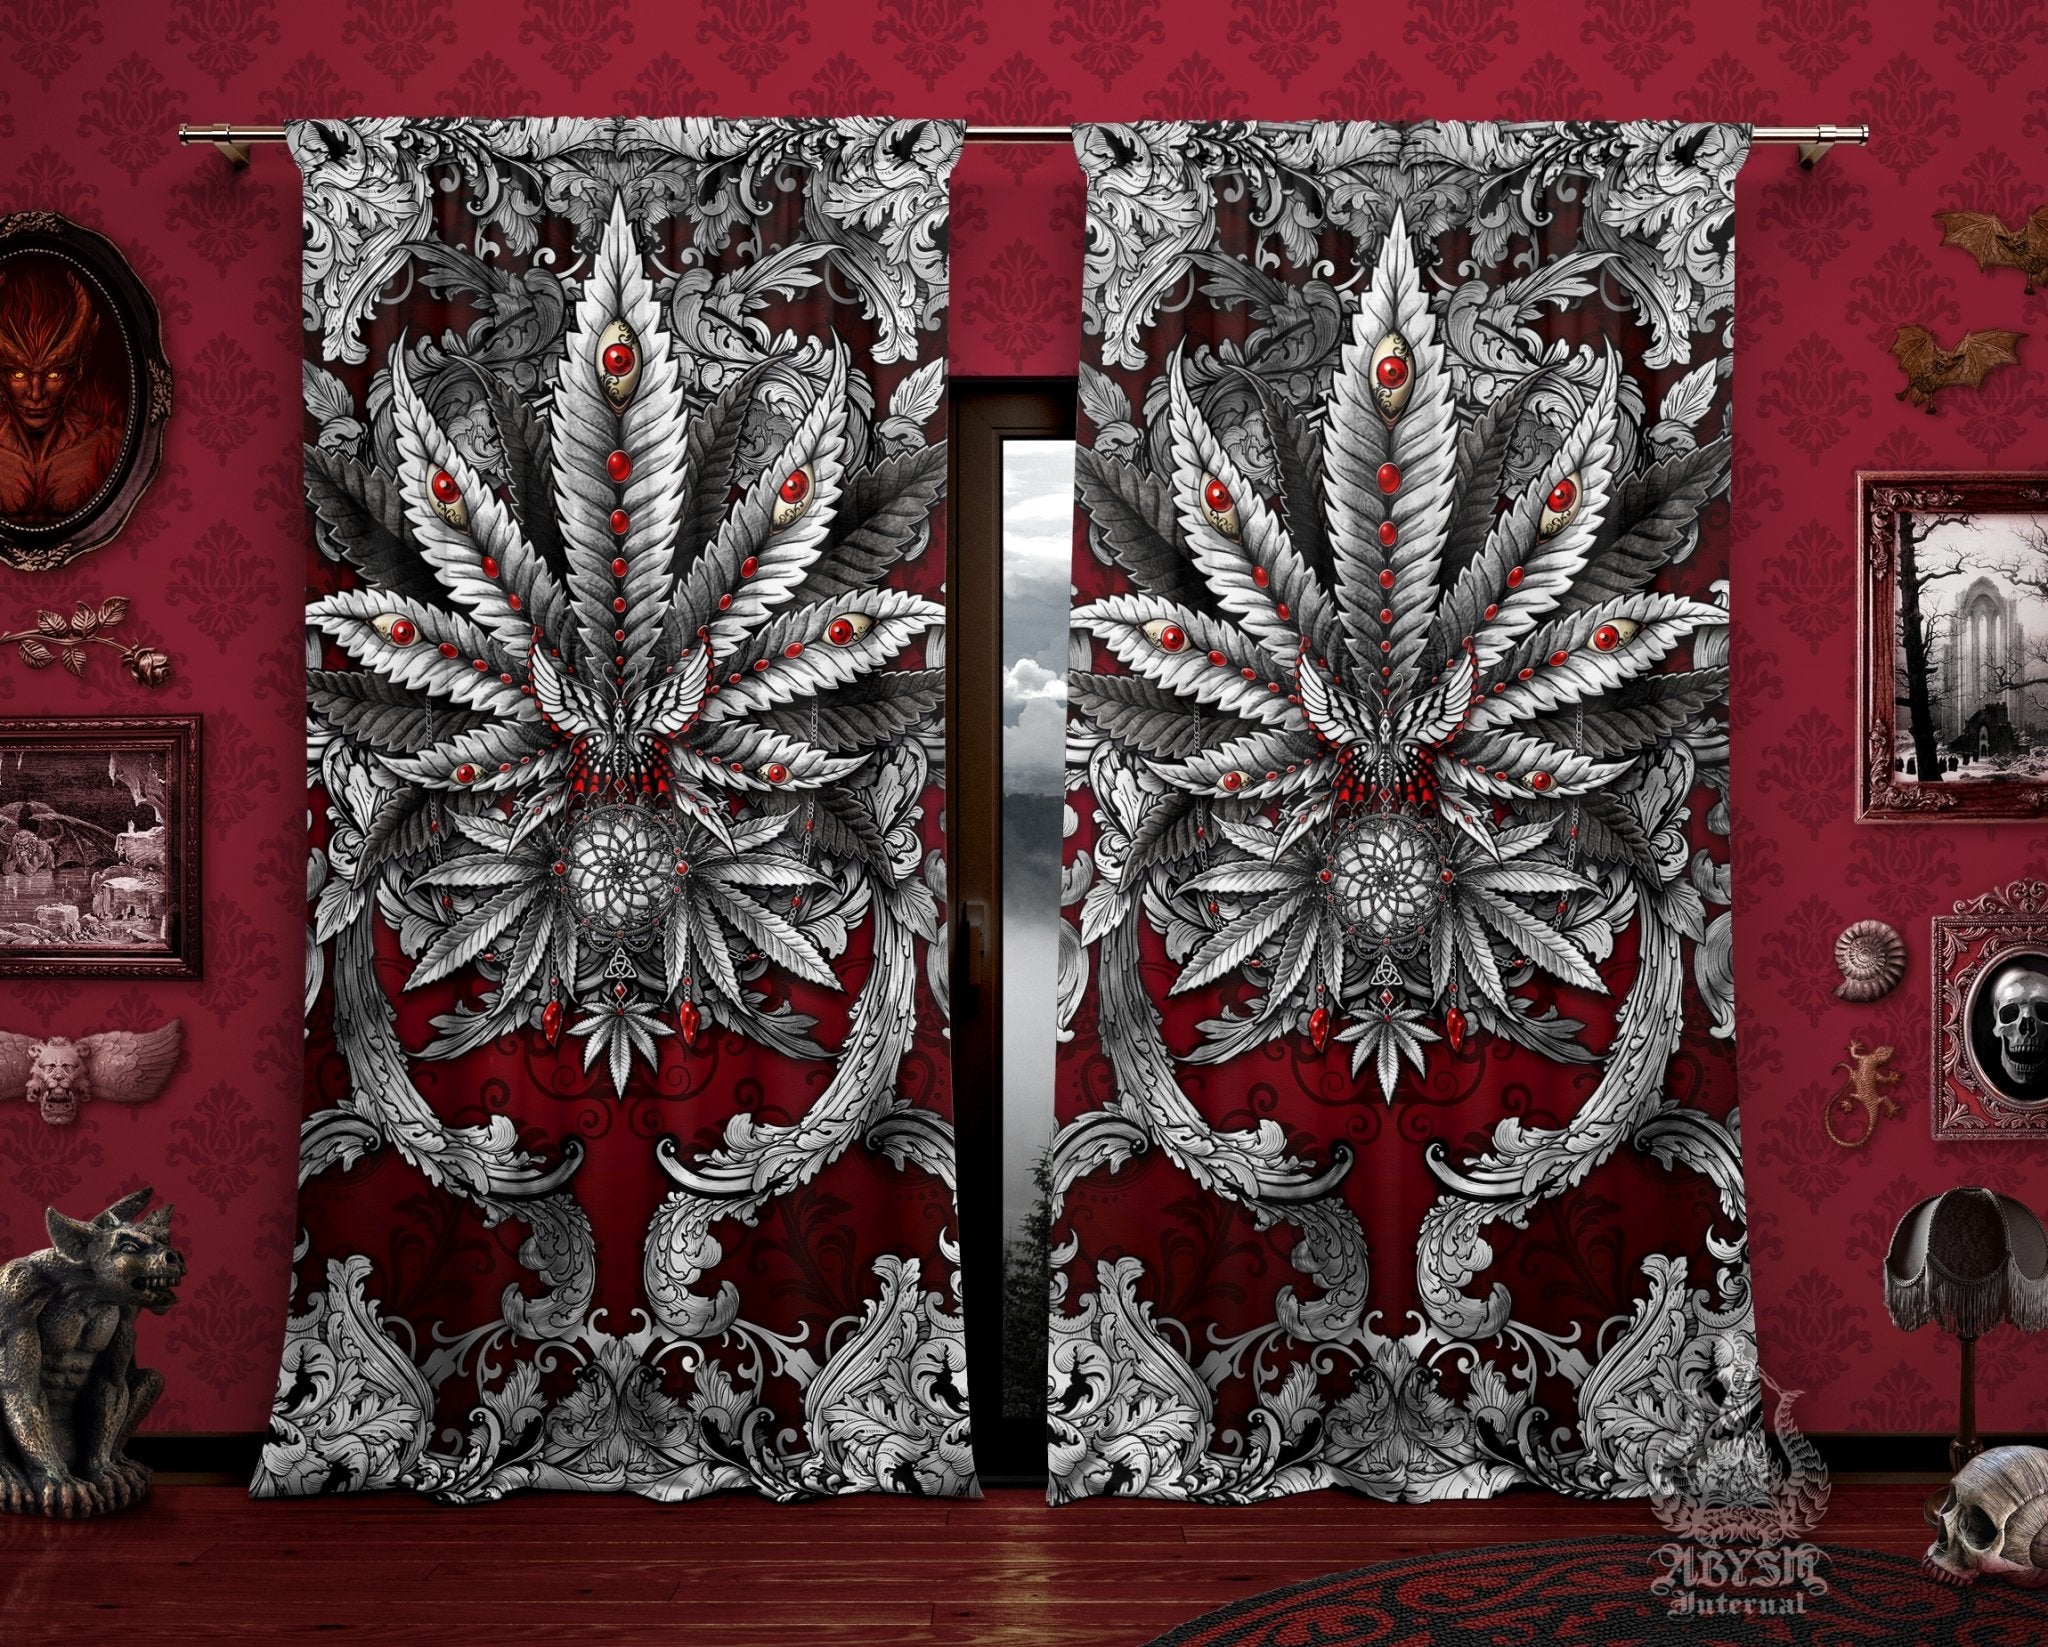 Weed Blackout Curtains, Cannabis Home and Shop Decor, Long Window Panels, Indie 420 Room Art Print - Silver - Abysm Internal